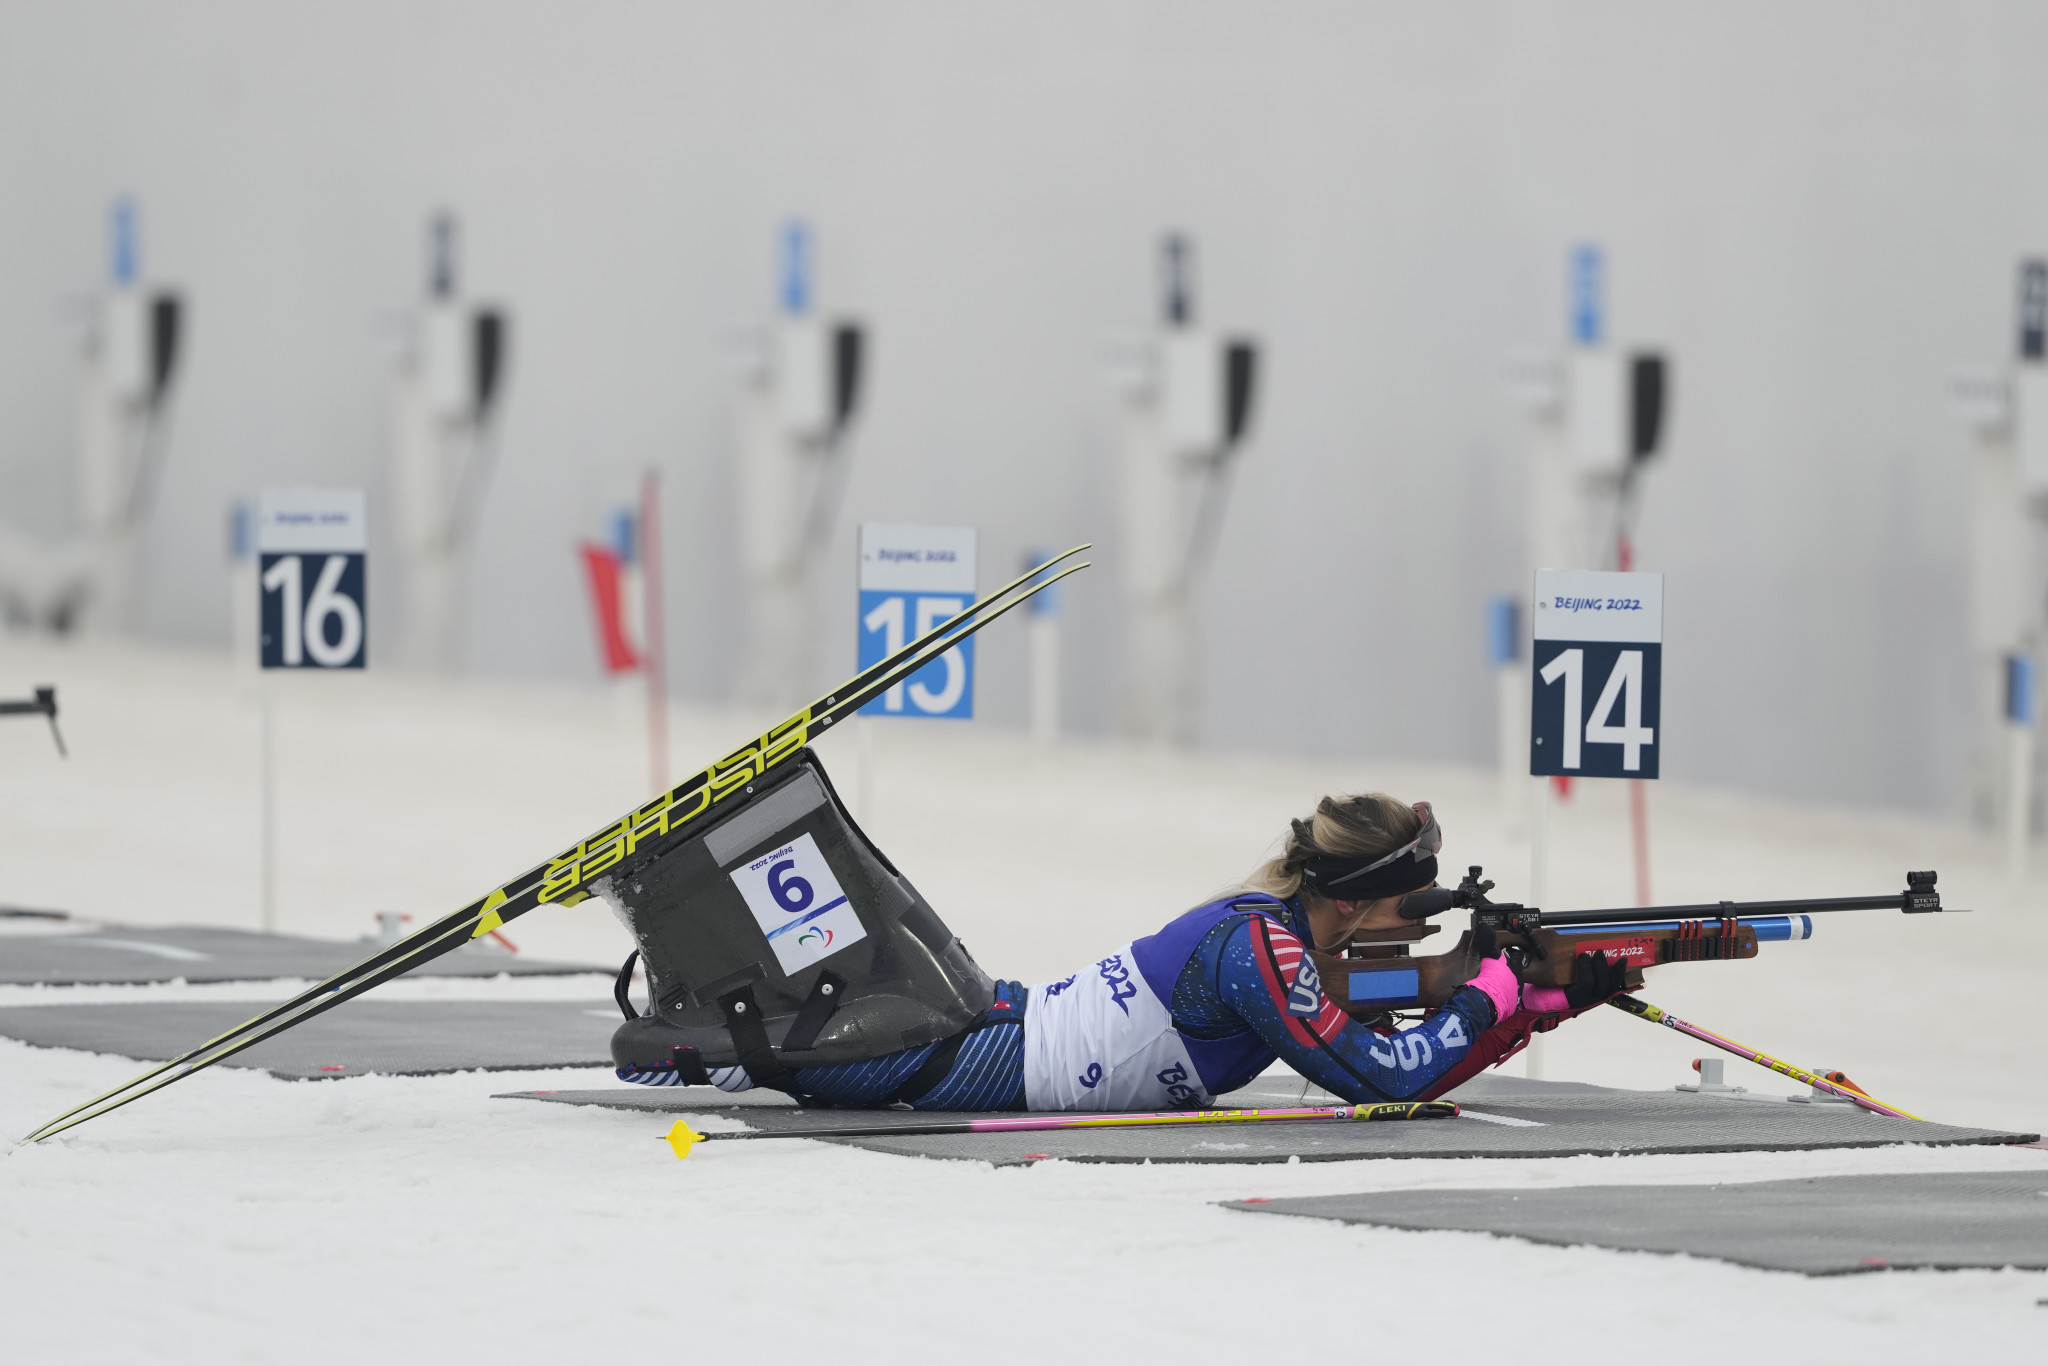 Masters wins another biathlon gold ahead of Gretsch at Beijing 2022